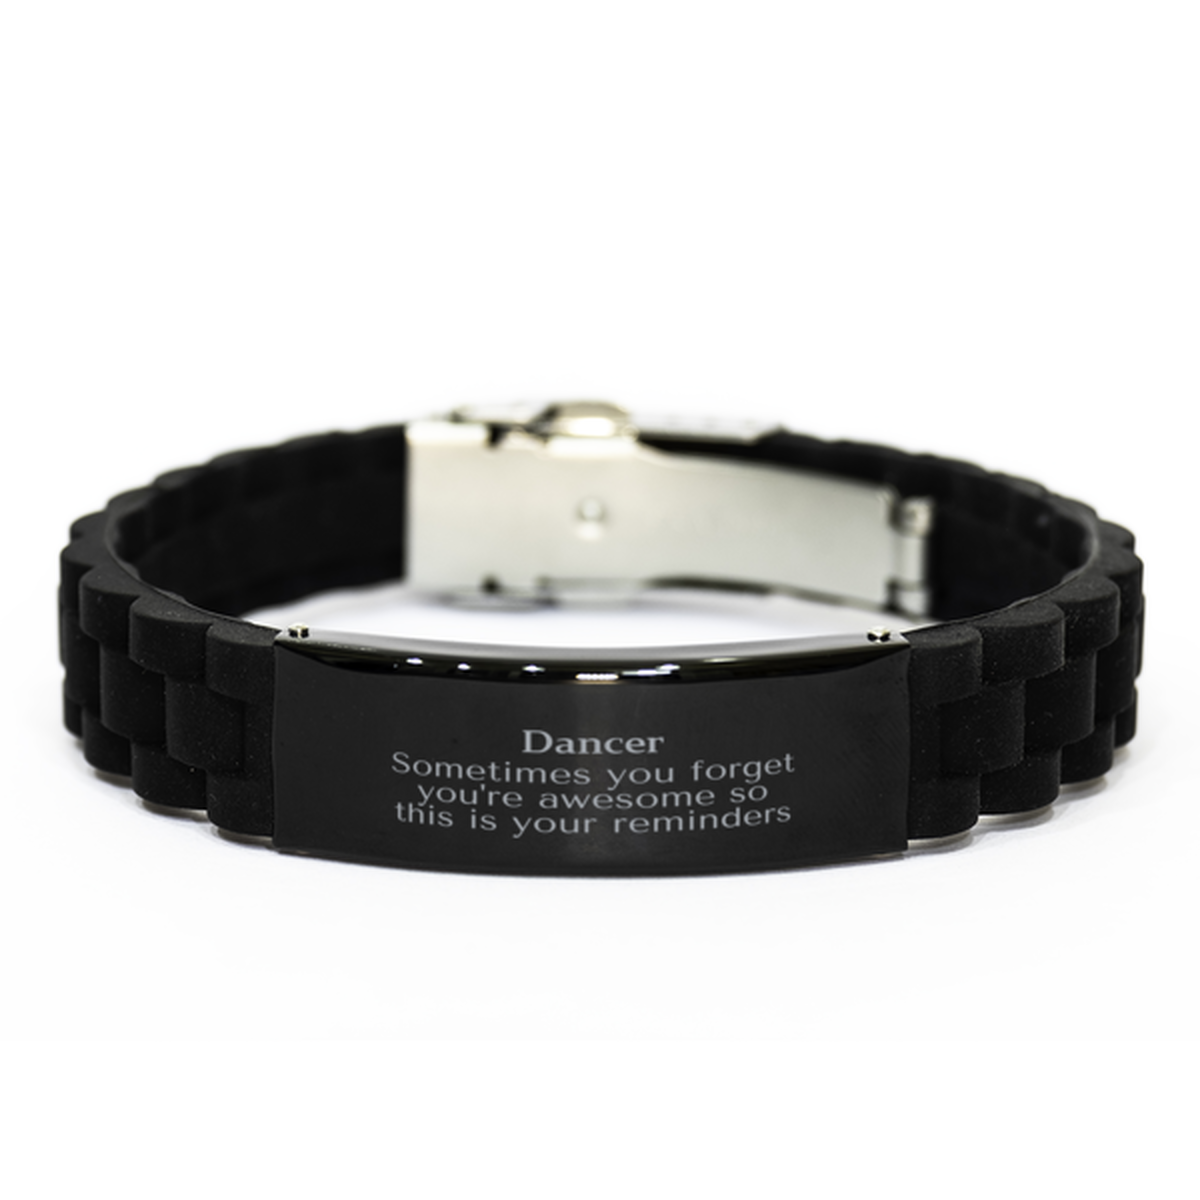 Sentimental Dancer Black Glidelock Clasp Bracelet, Dancer Sometimes you forget you're awesome so this is your reminders, Graduation Christmas Birthday Gifts for Dancer, Men, Women, Coworkers